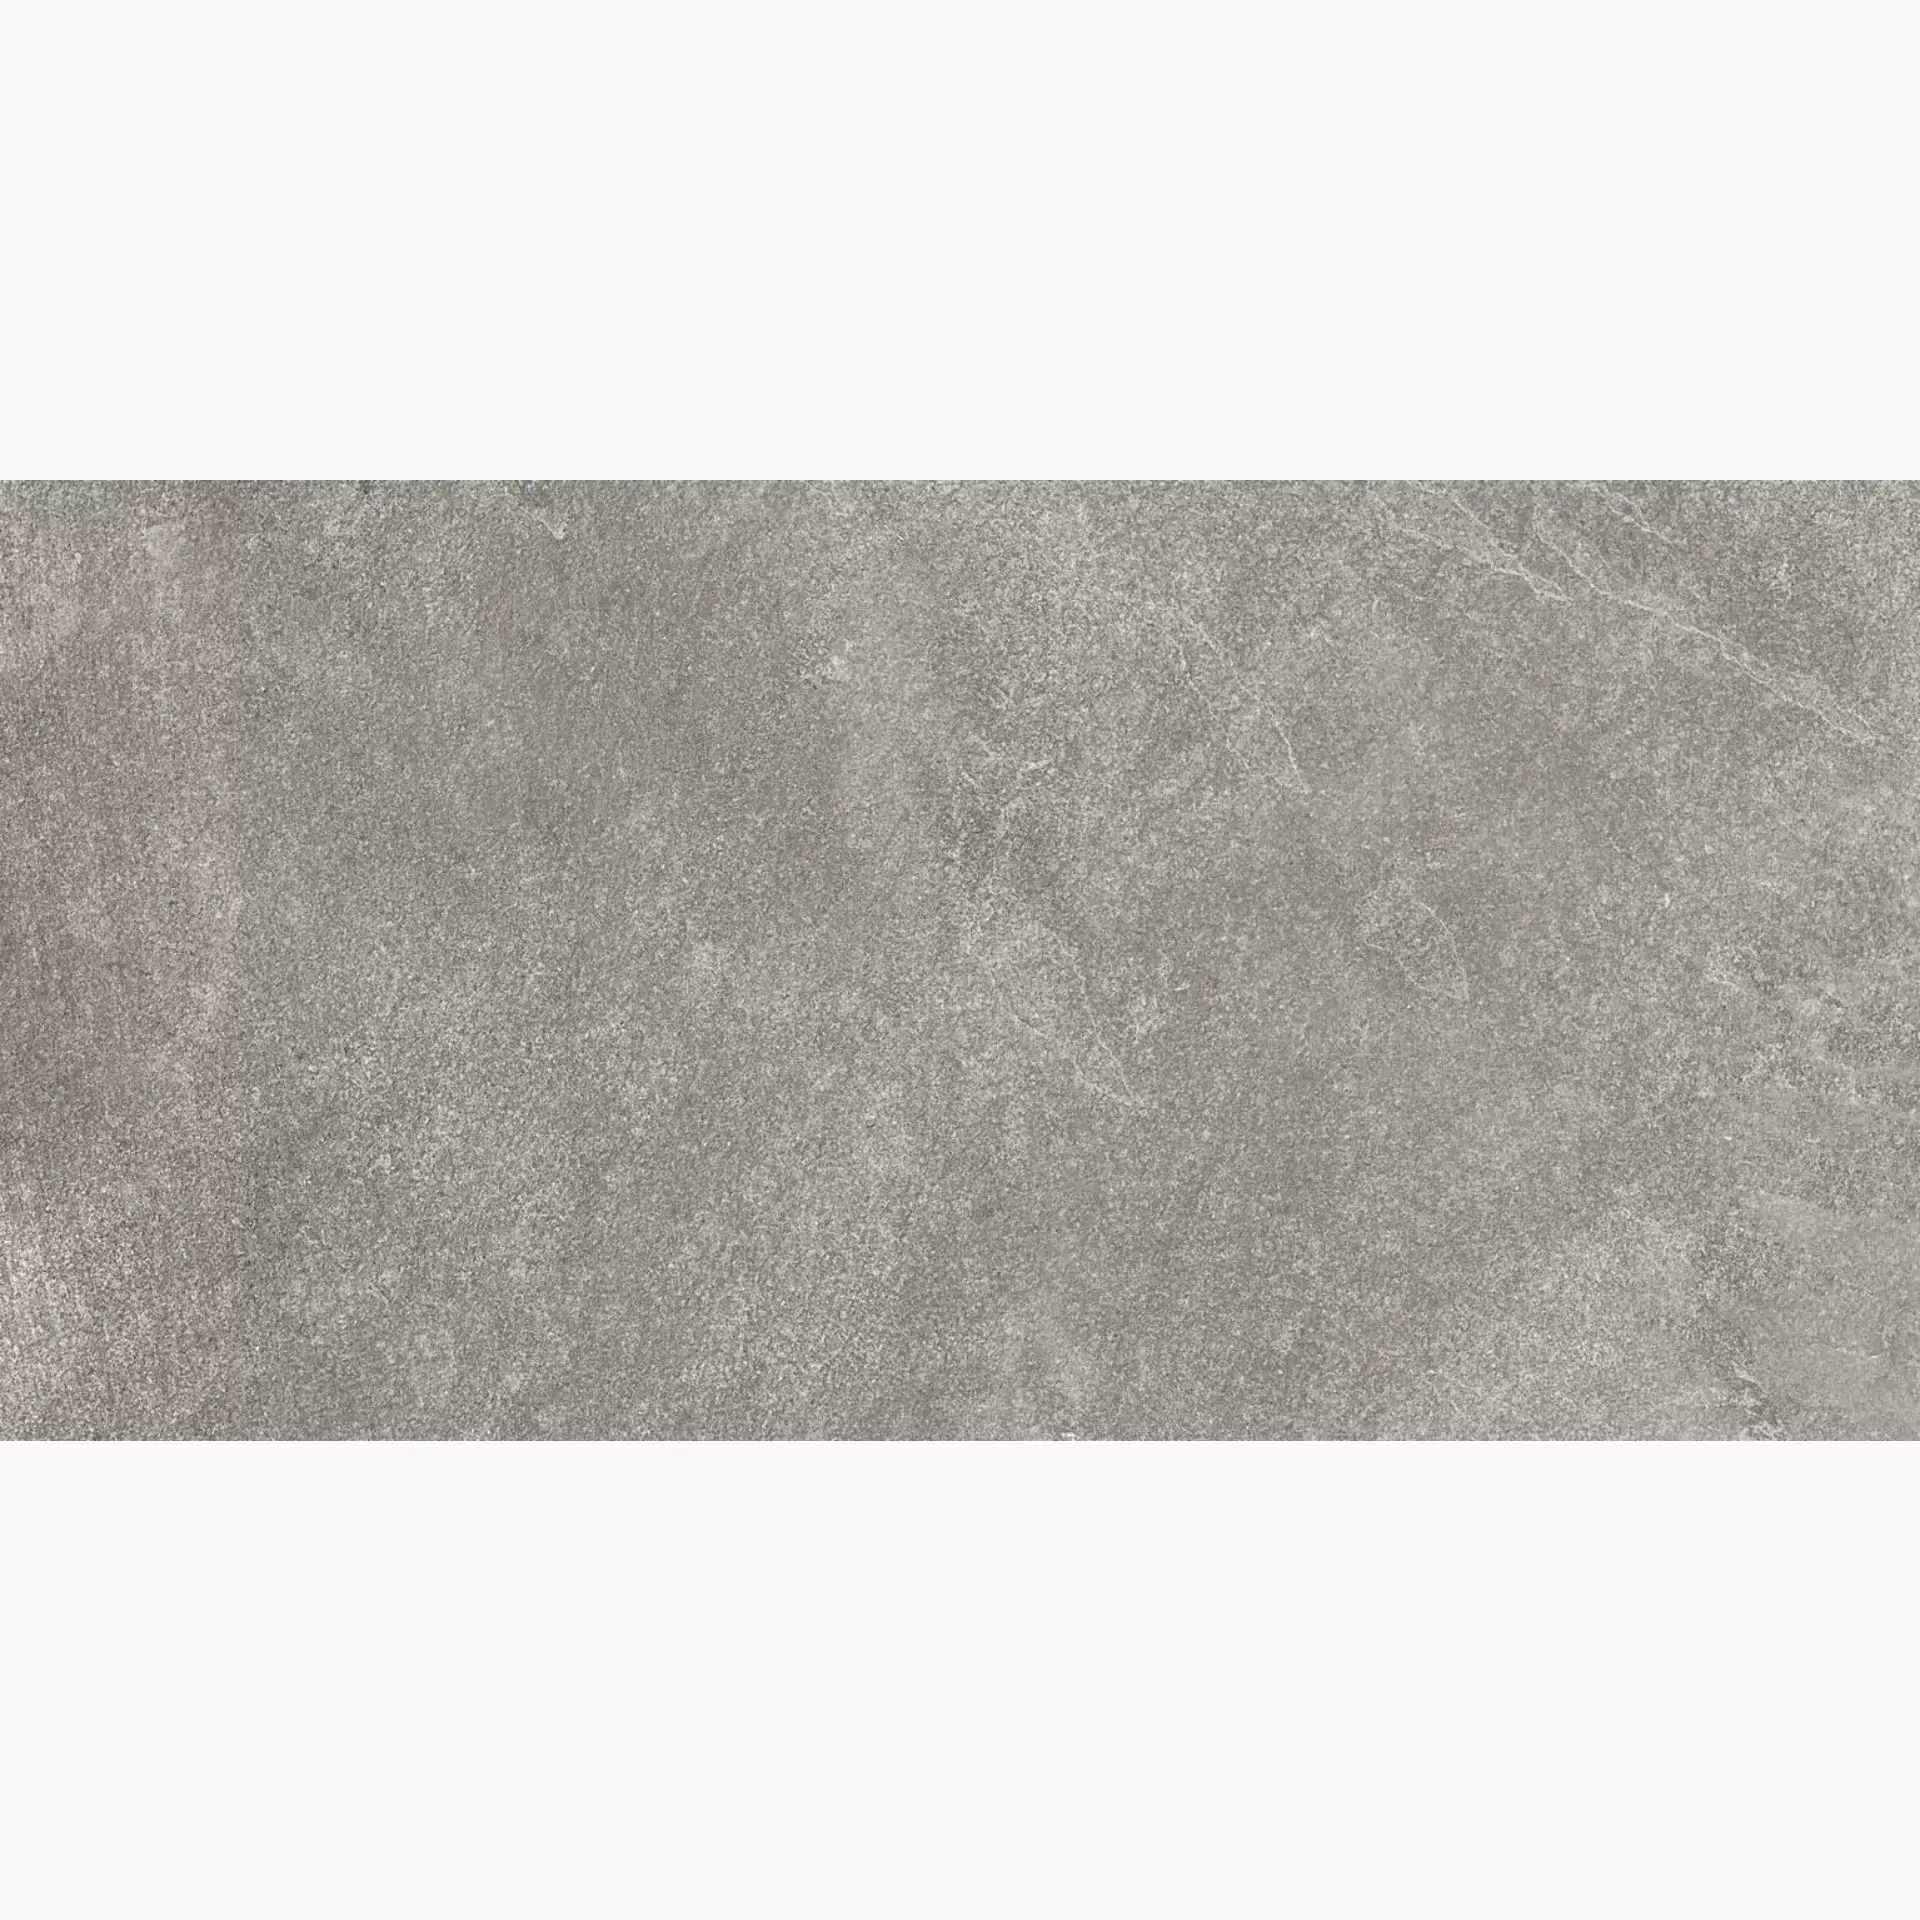 ABK Monolith Greige Naturale PF60002351 30x60cm rectified 8,5mm